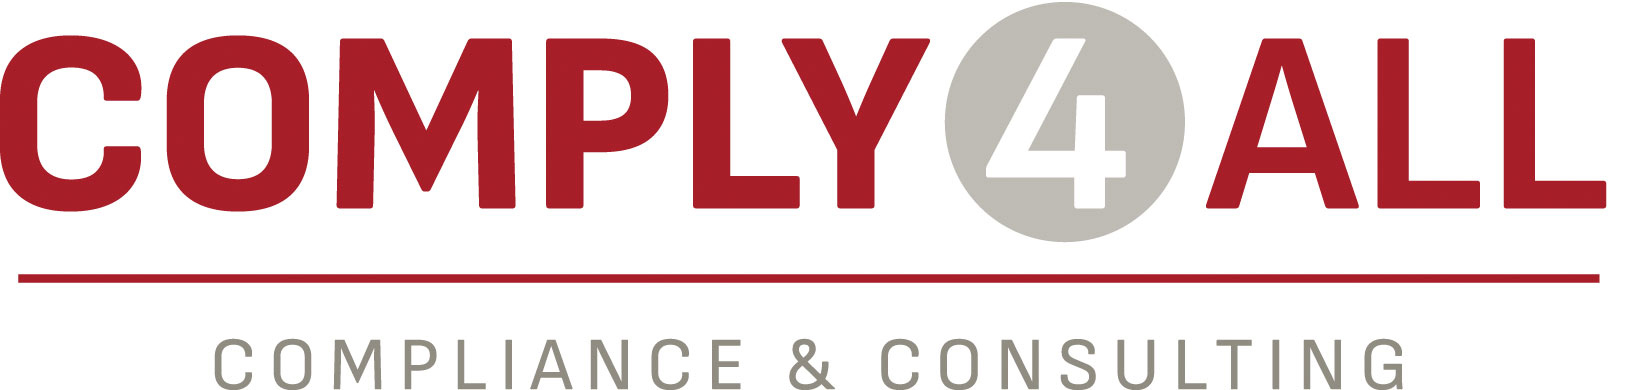 Comply4All GmbH - Compliance & Consulting